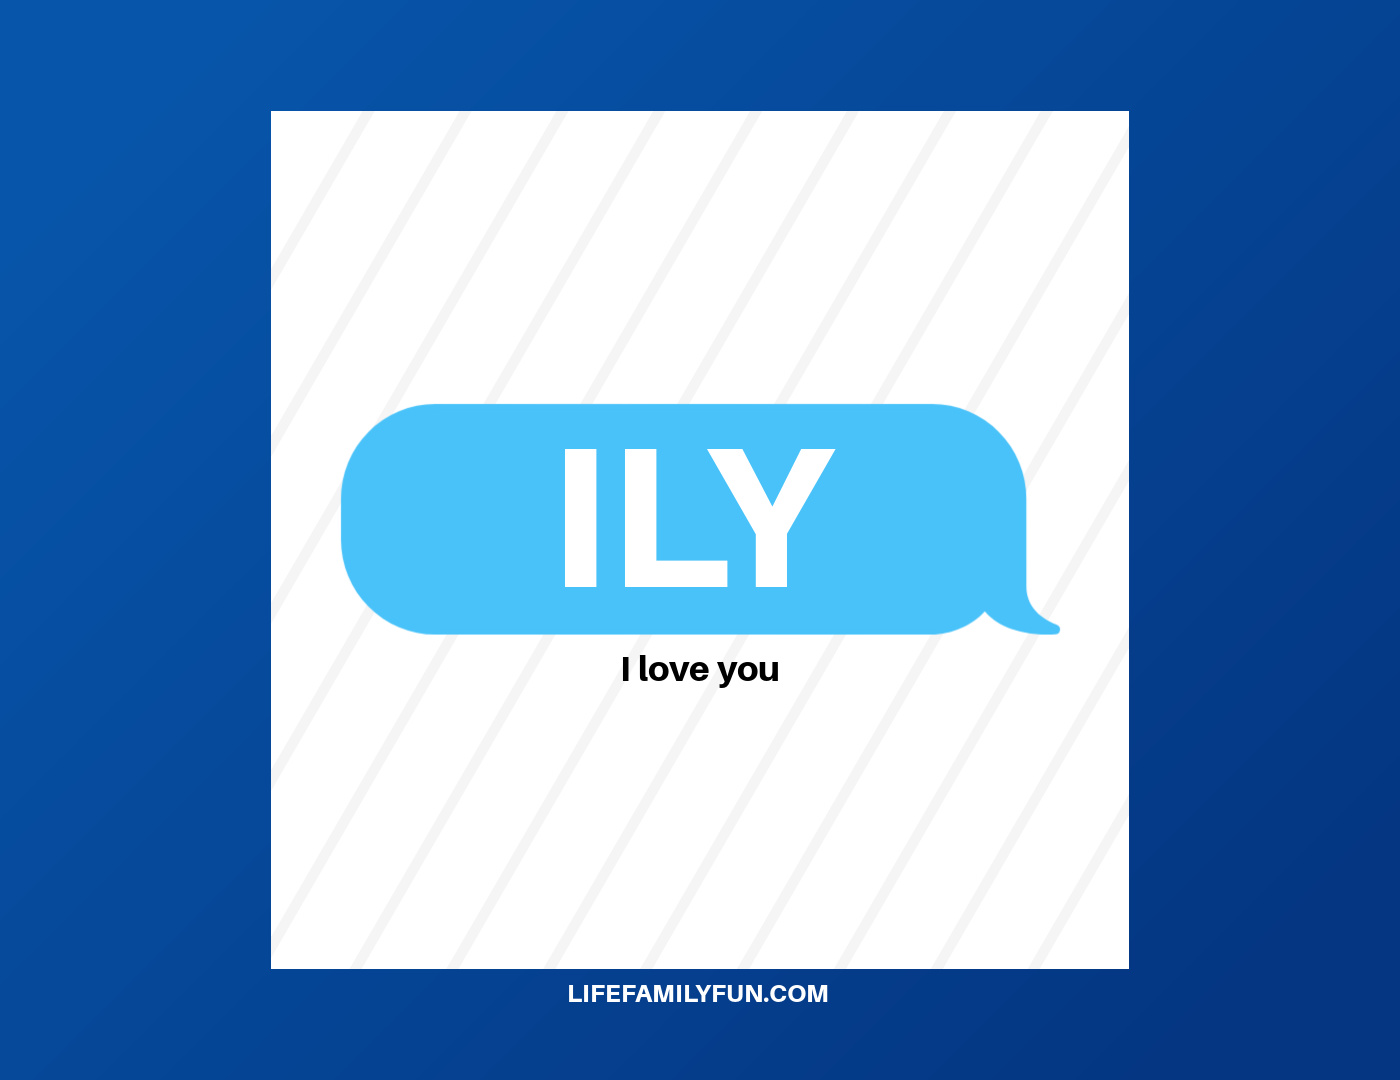 What Does ILY Mean?